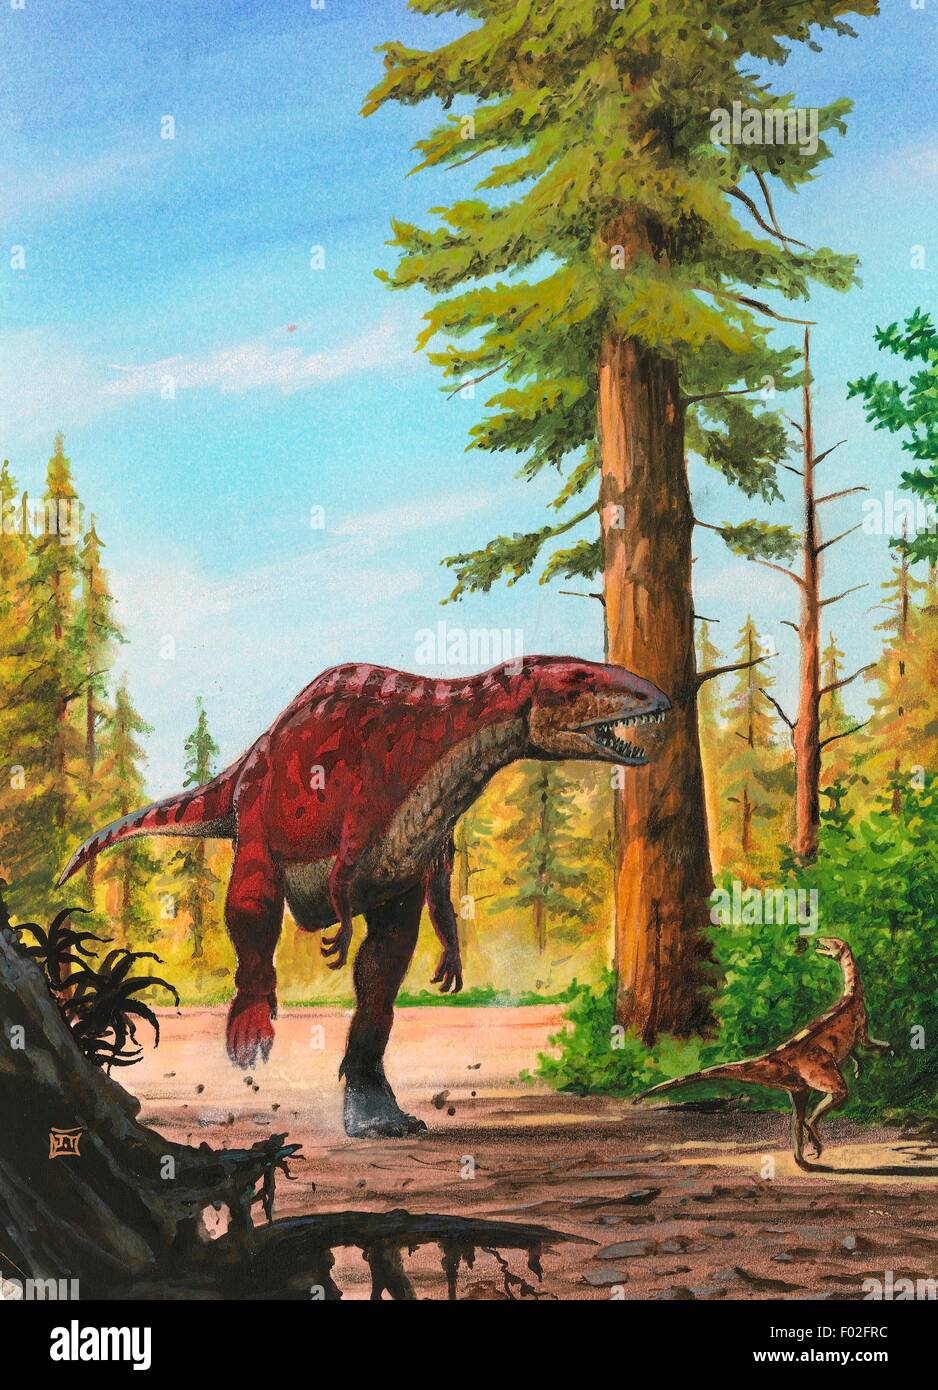 Acrocanthosaurus atokensis, Carcharodontosauridae, Cretacico. Artwork by Dang. Banque D'Images